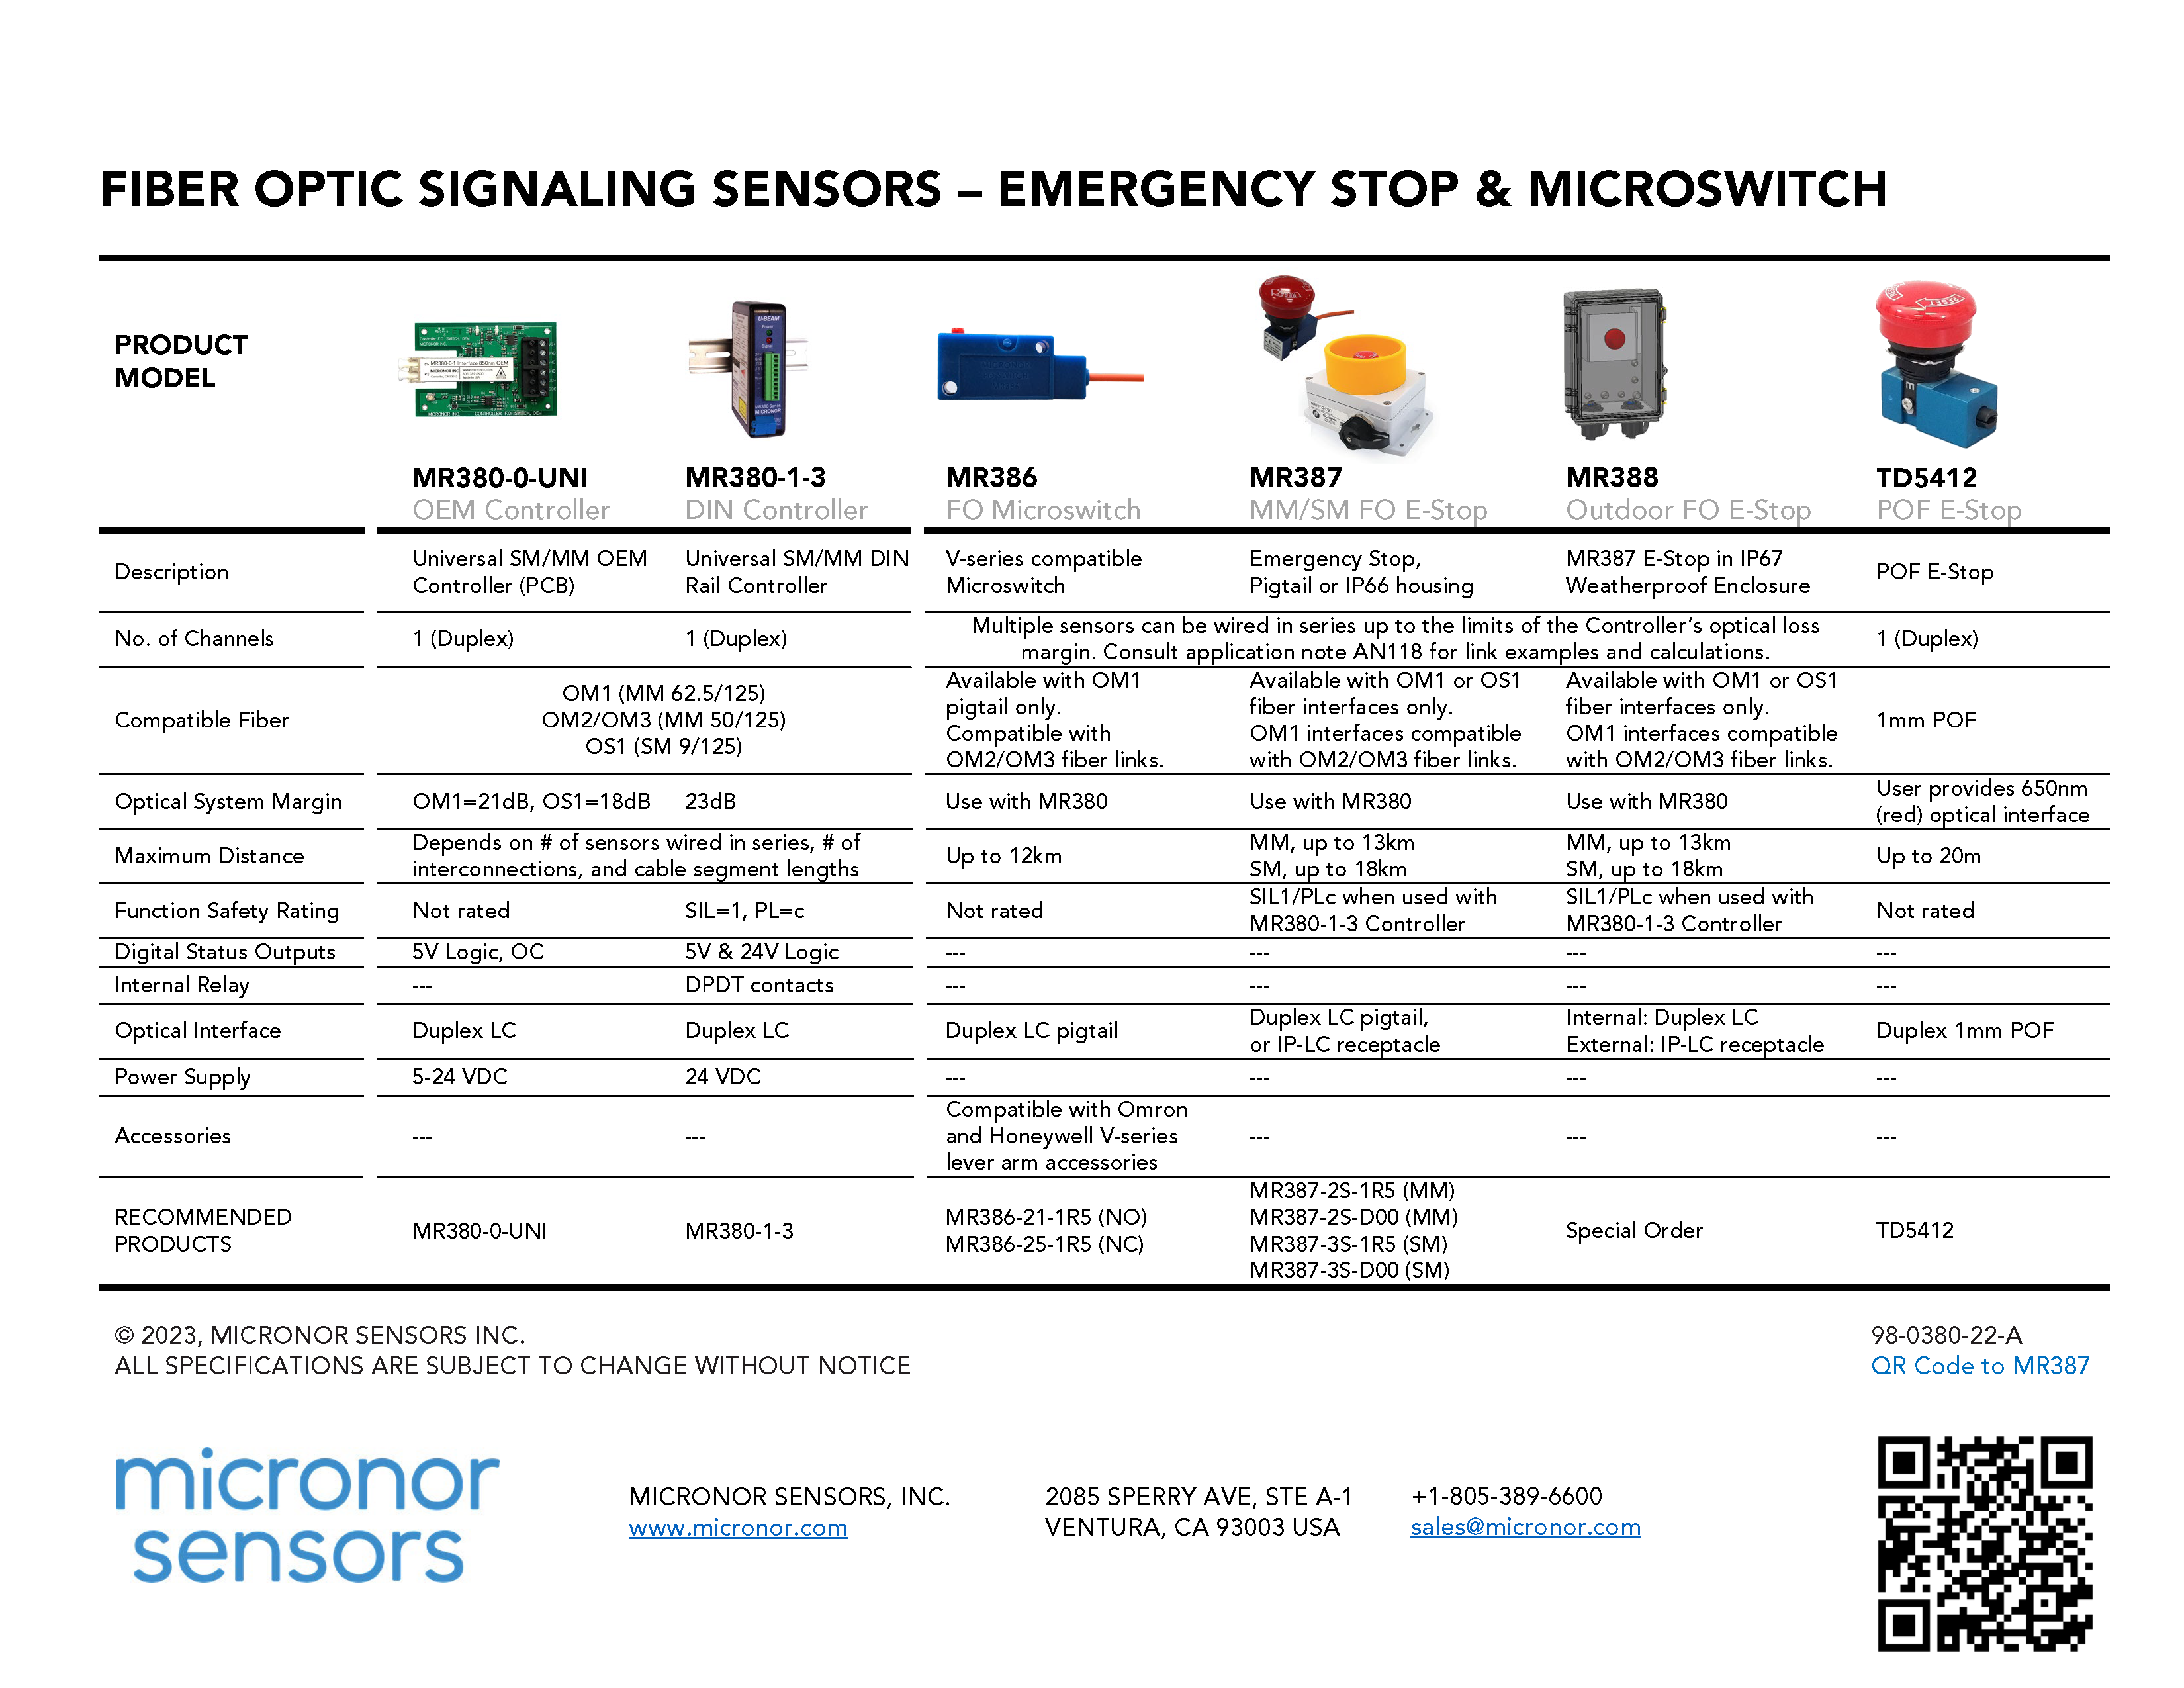 Quick Guide for Micronor Fiber Optic E-Stop and Microswitch Products